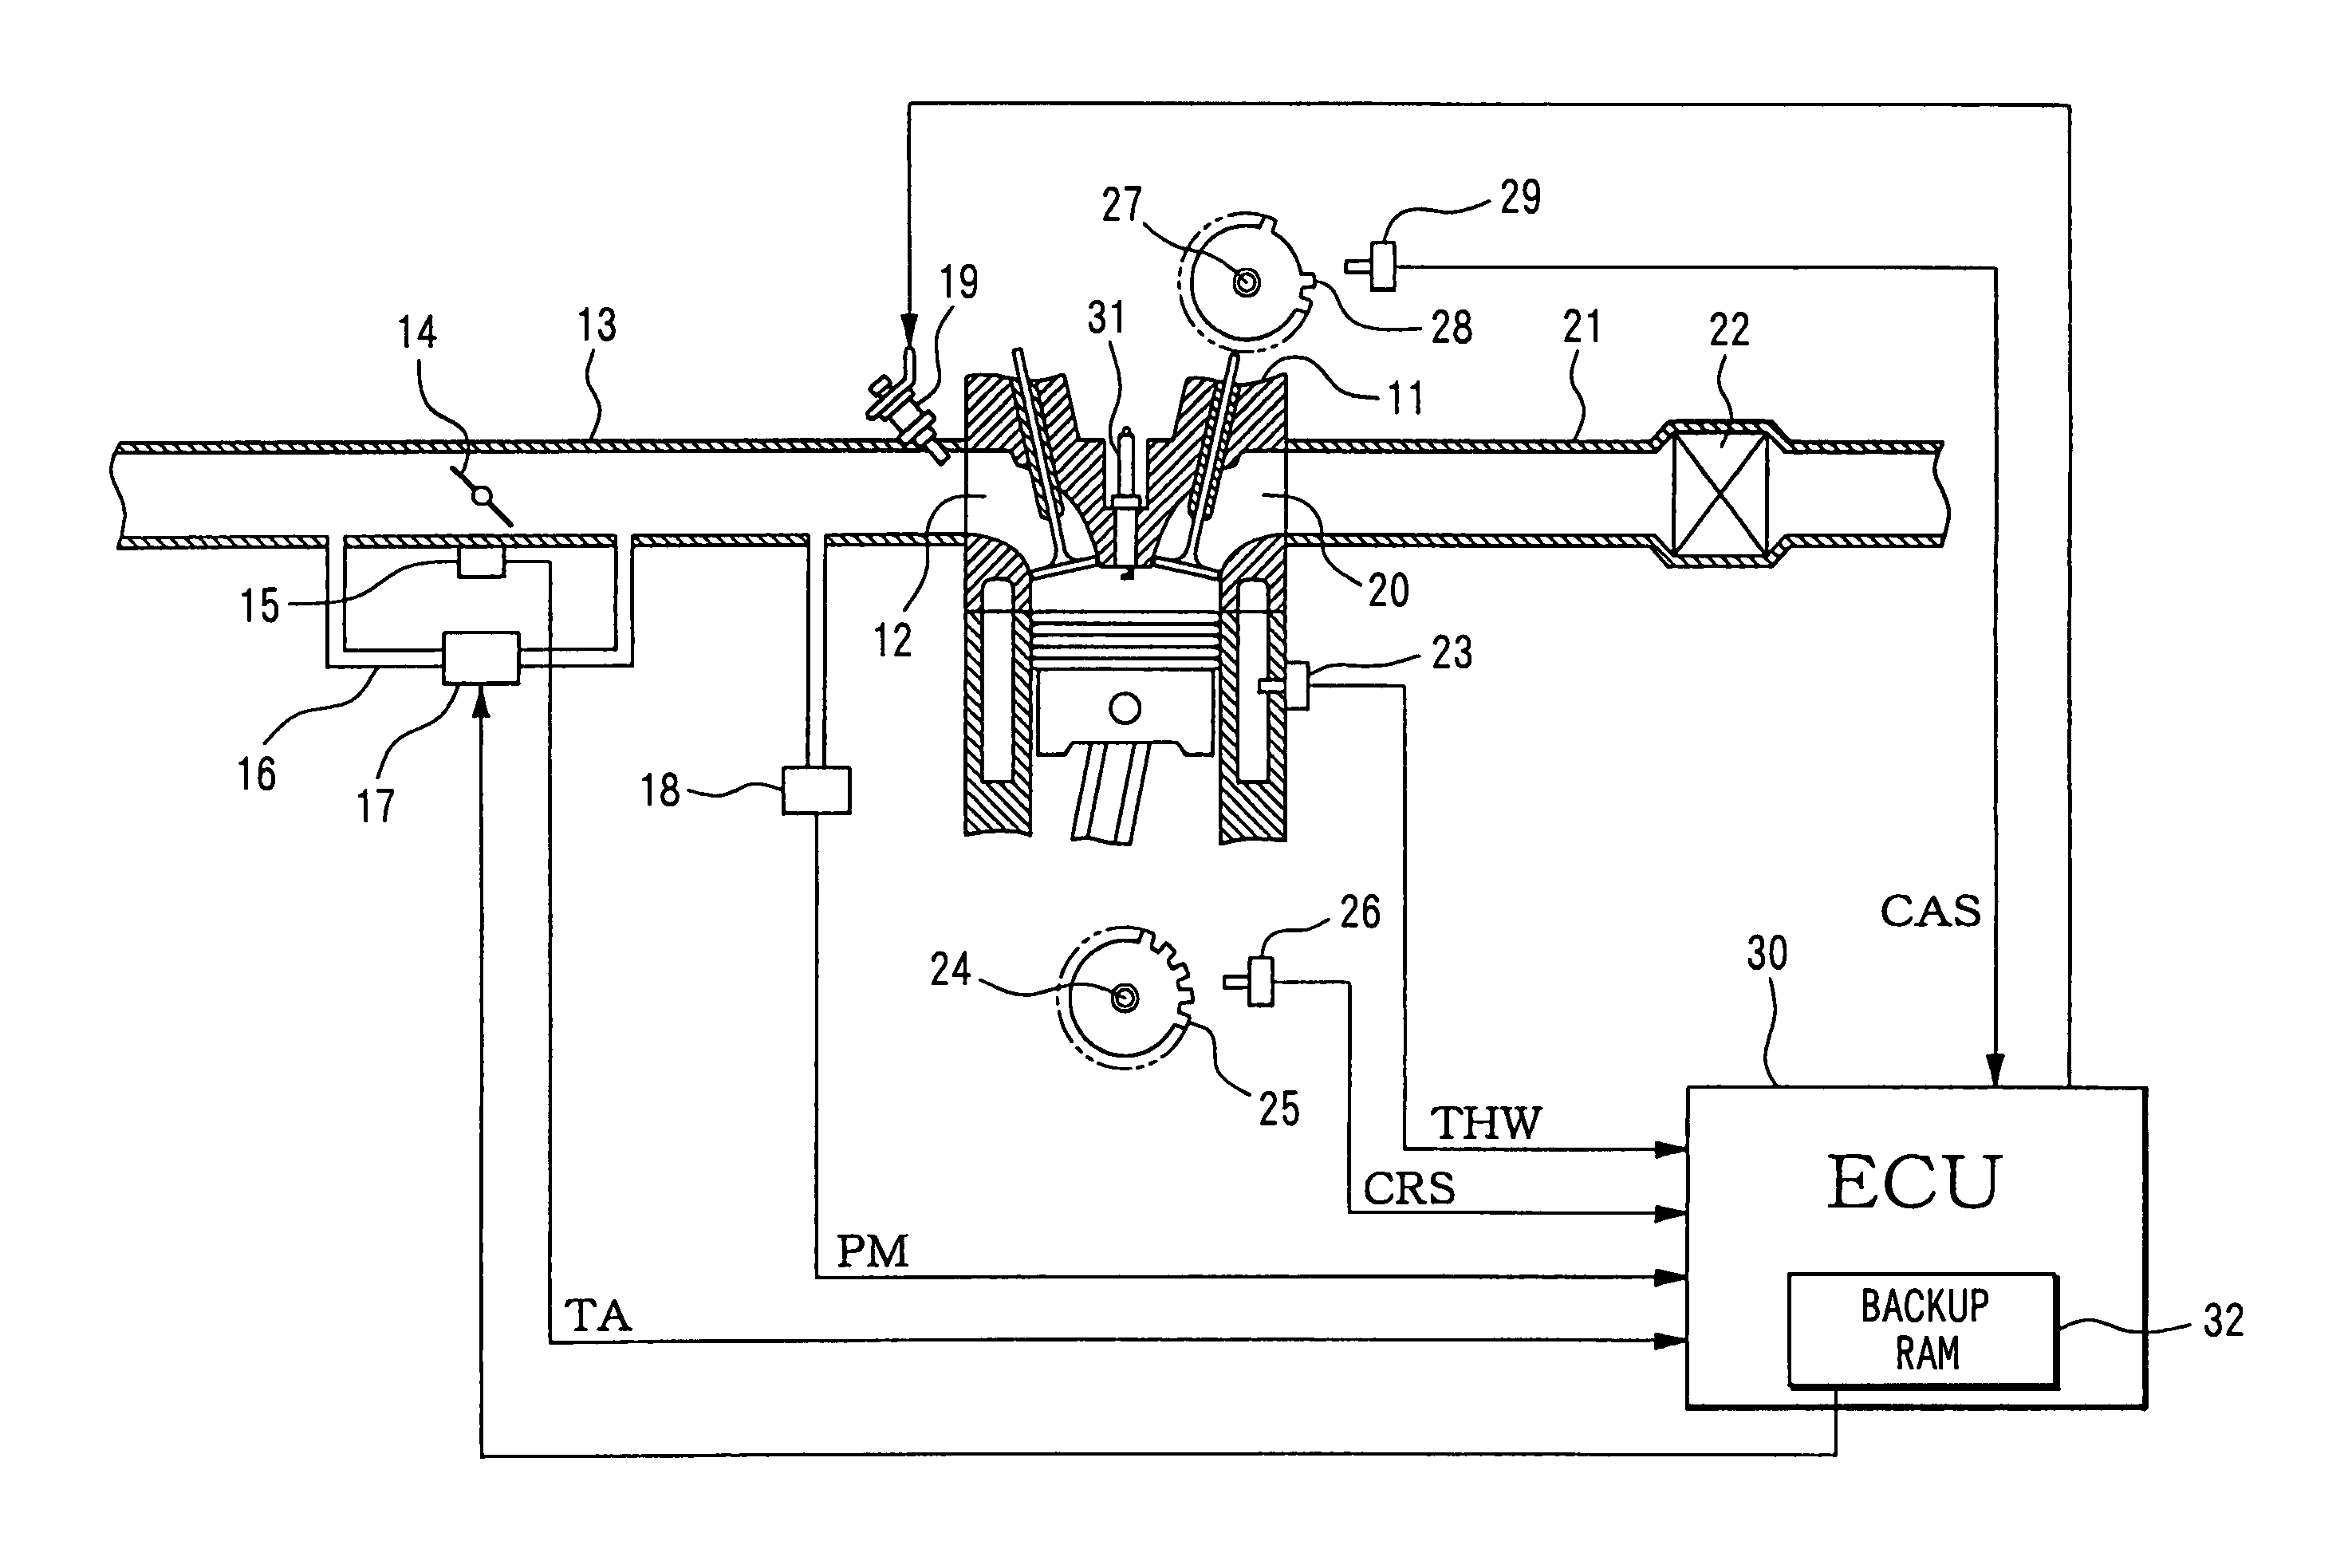 Engine controller for starting and stopping engine